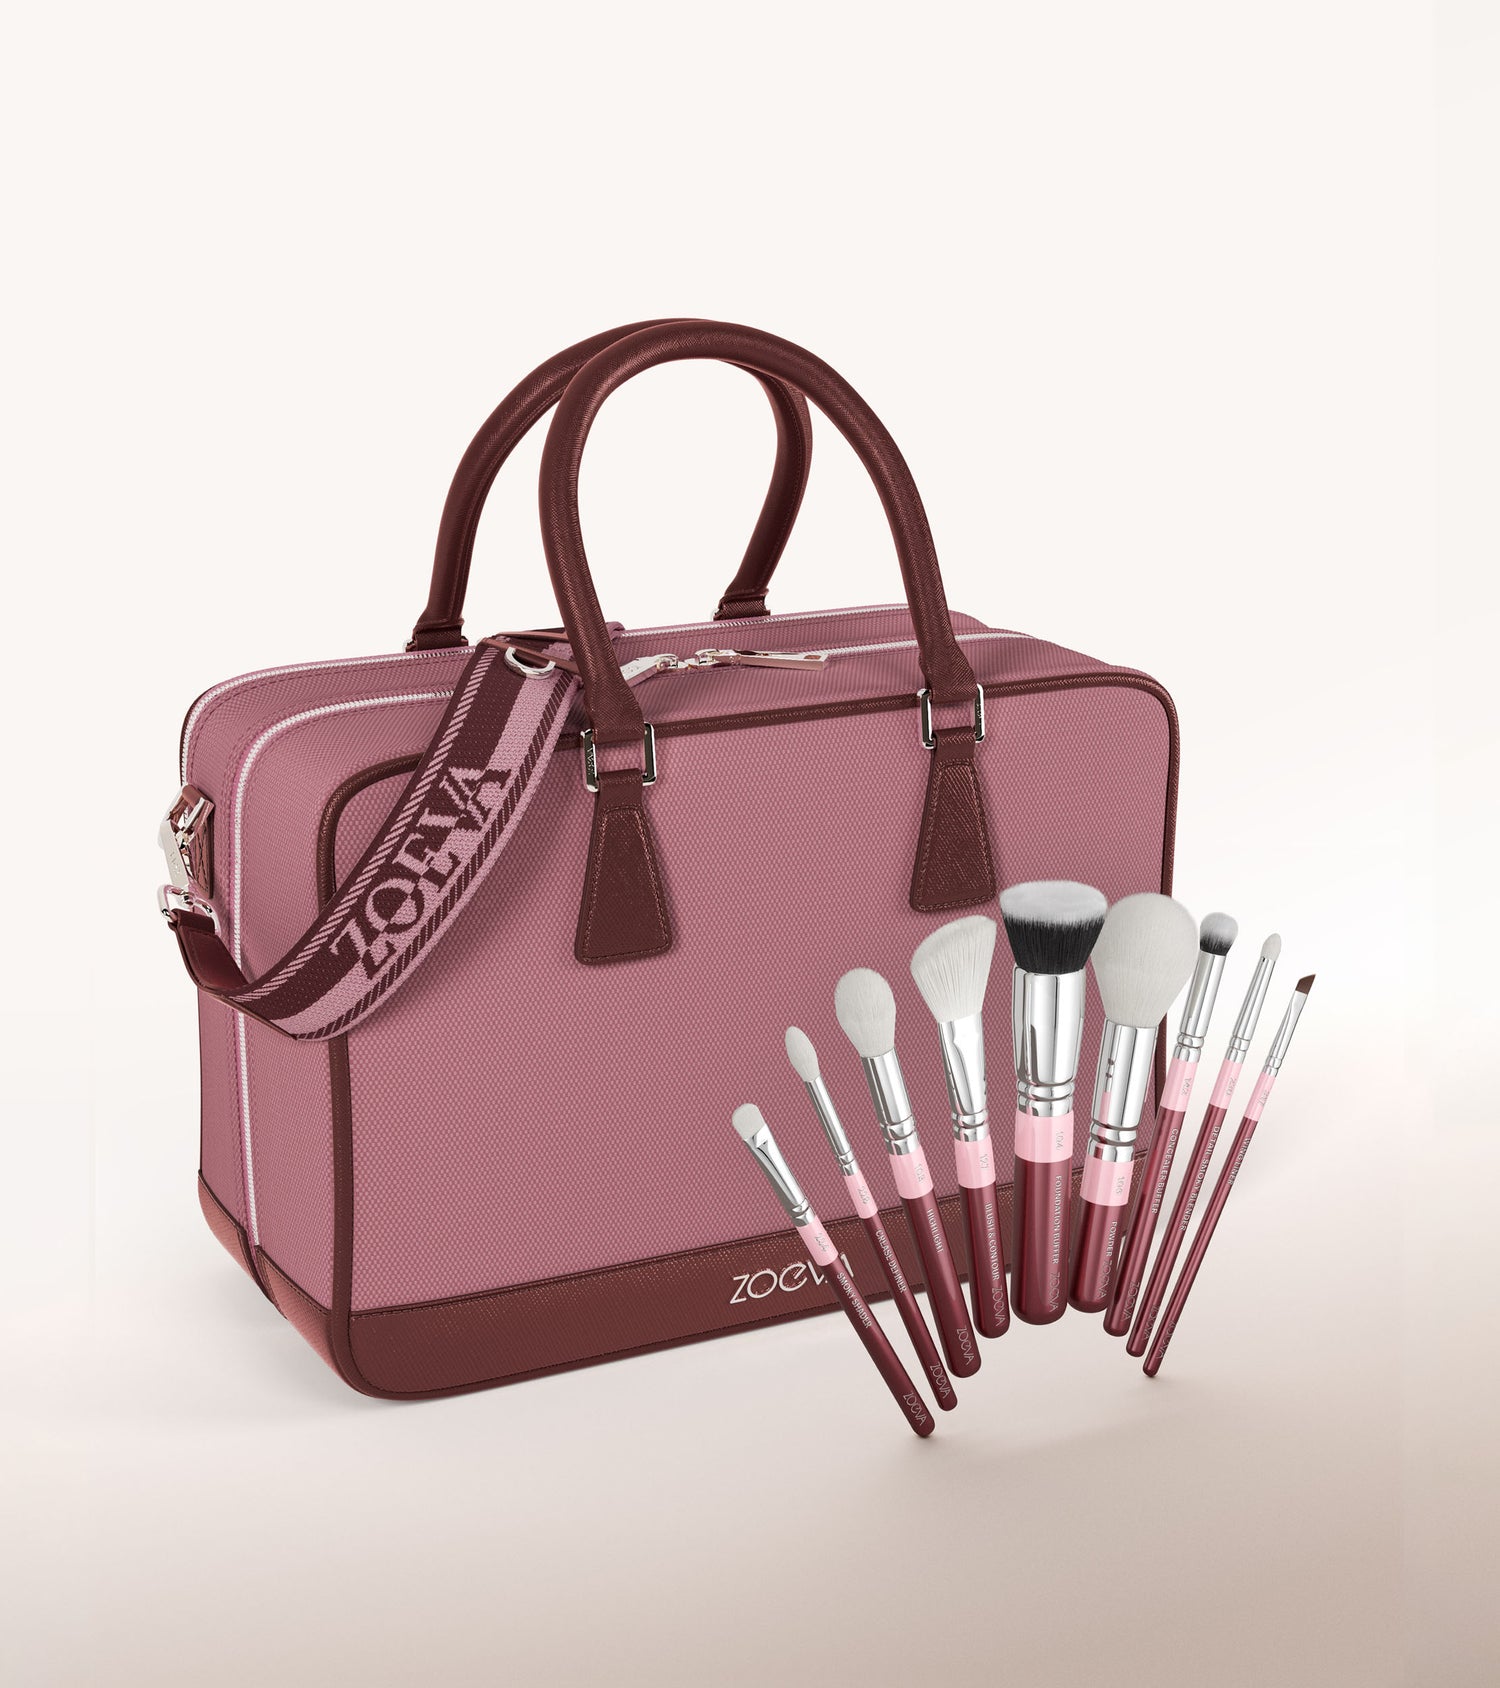 ZOEVA - The Zoe Bag & The Complete Pinselset (DUSTY BORDEAUX) - BRUSH SET